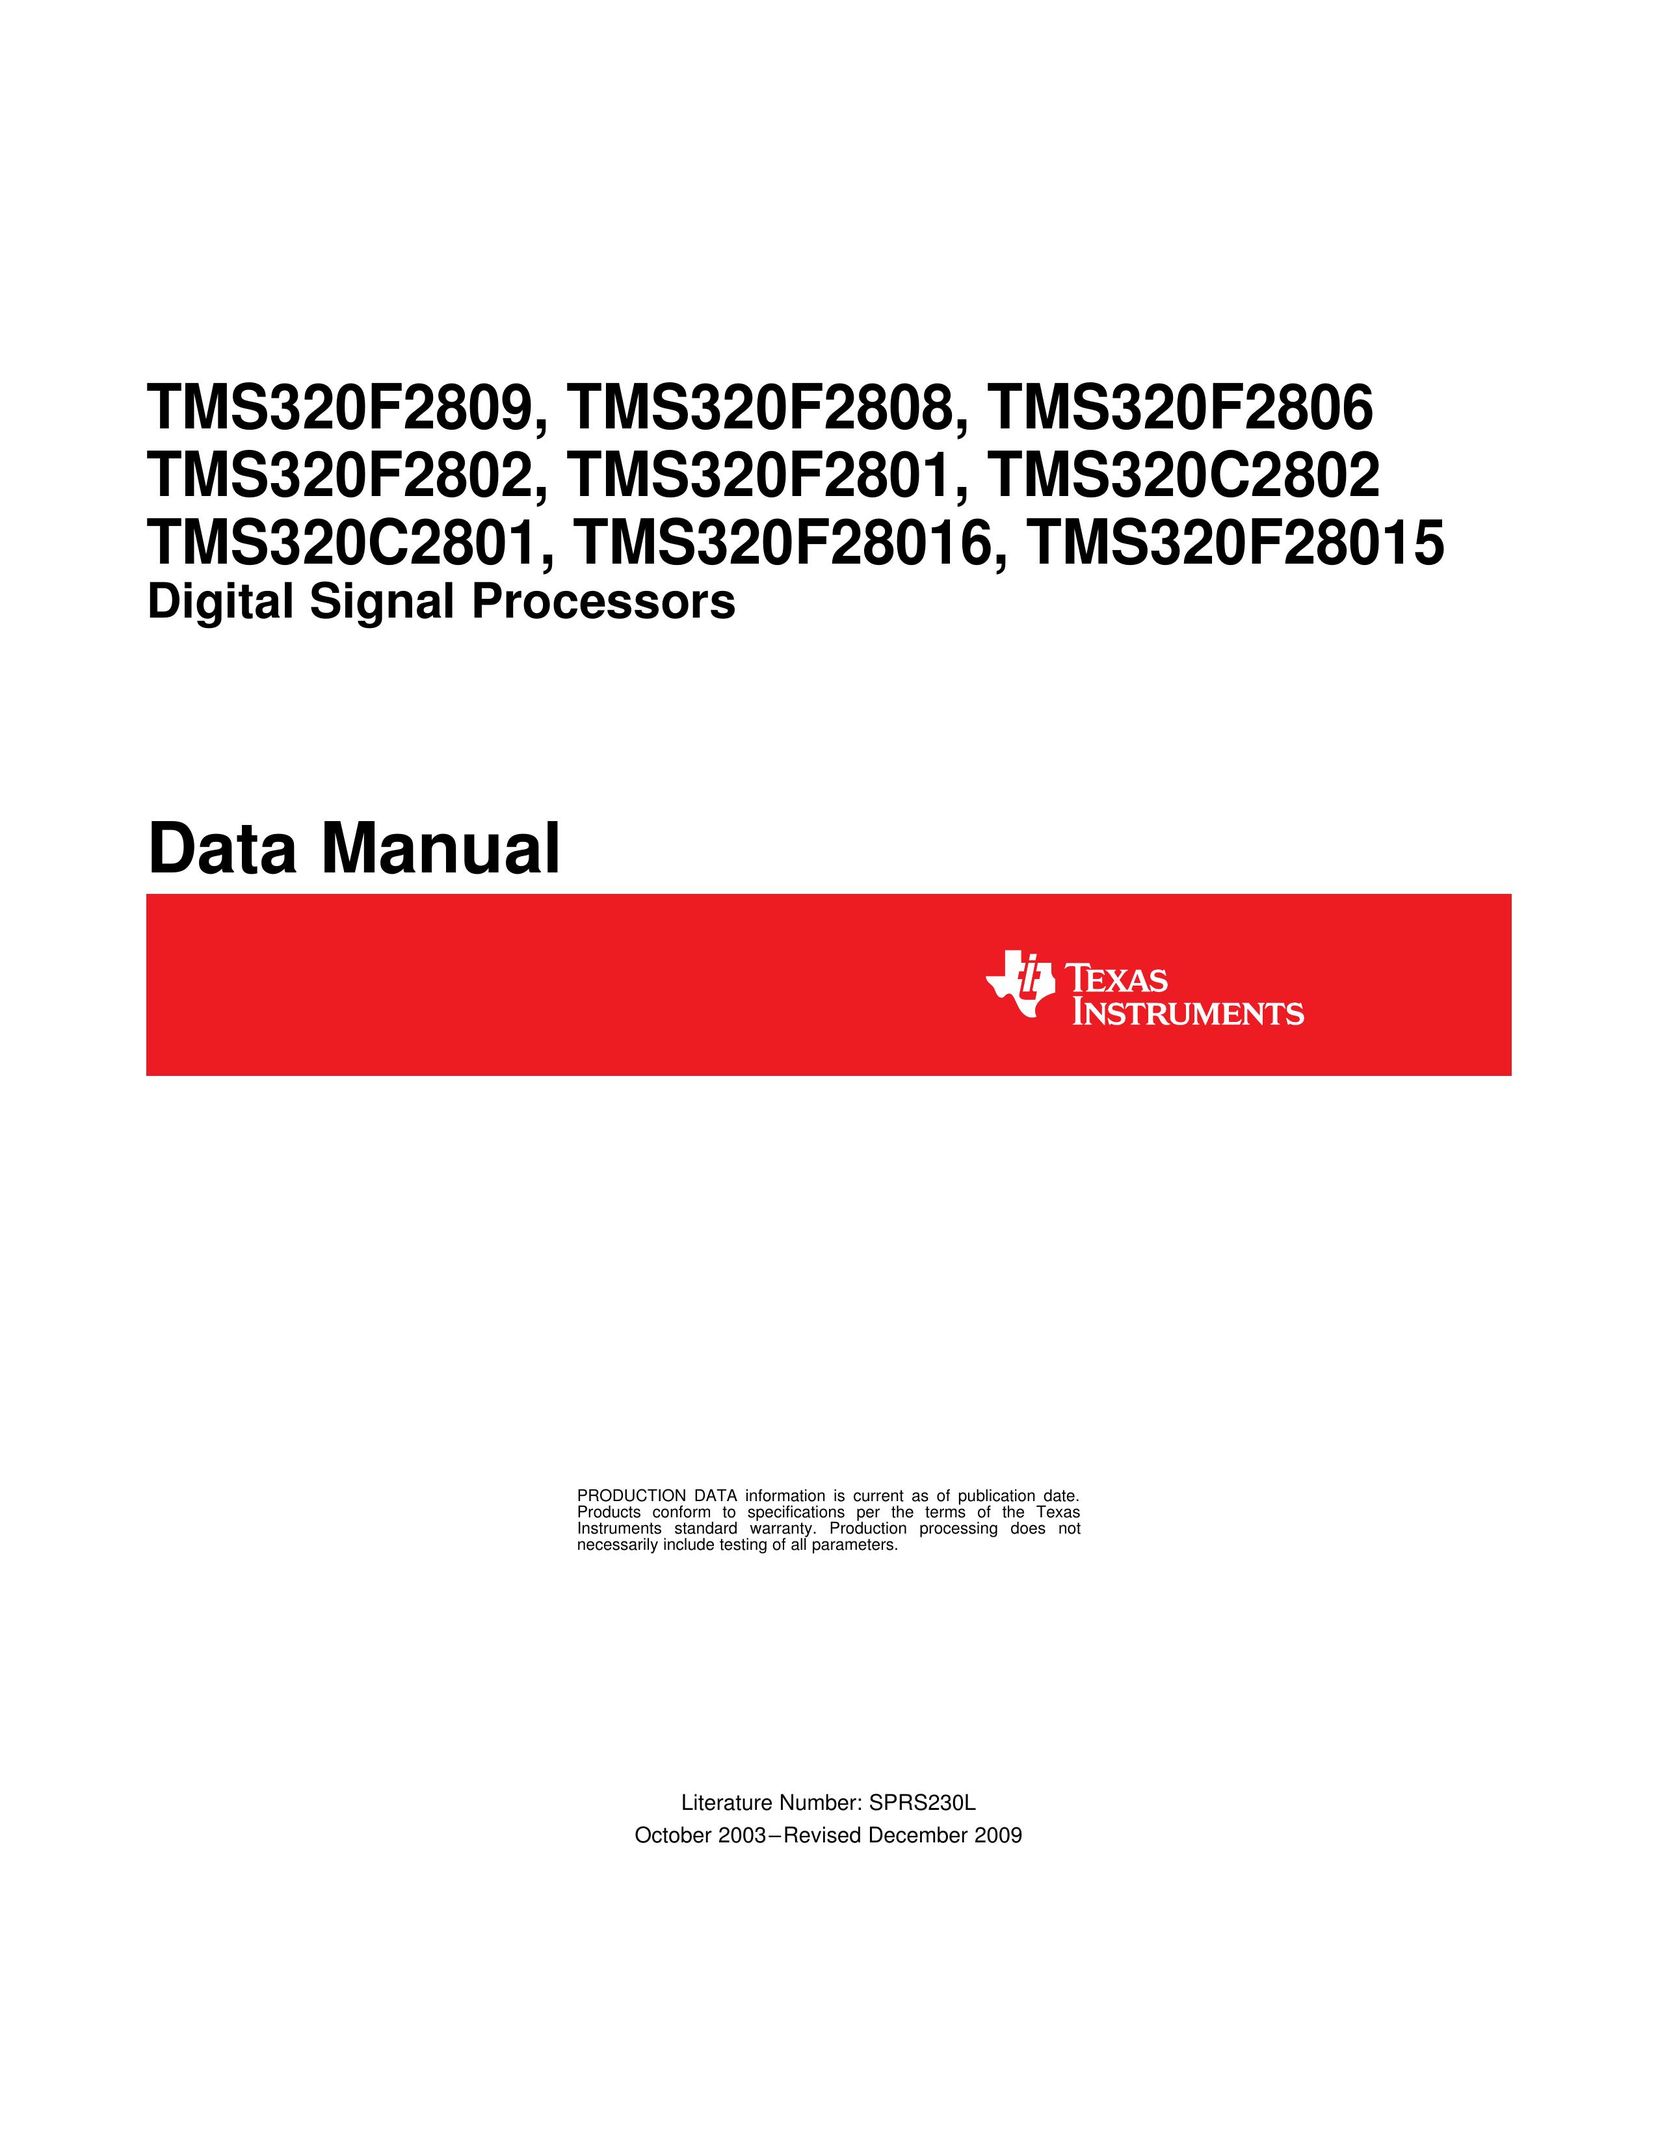 Texas Instruments TMS320F2809 Stereo System User Manual